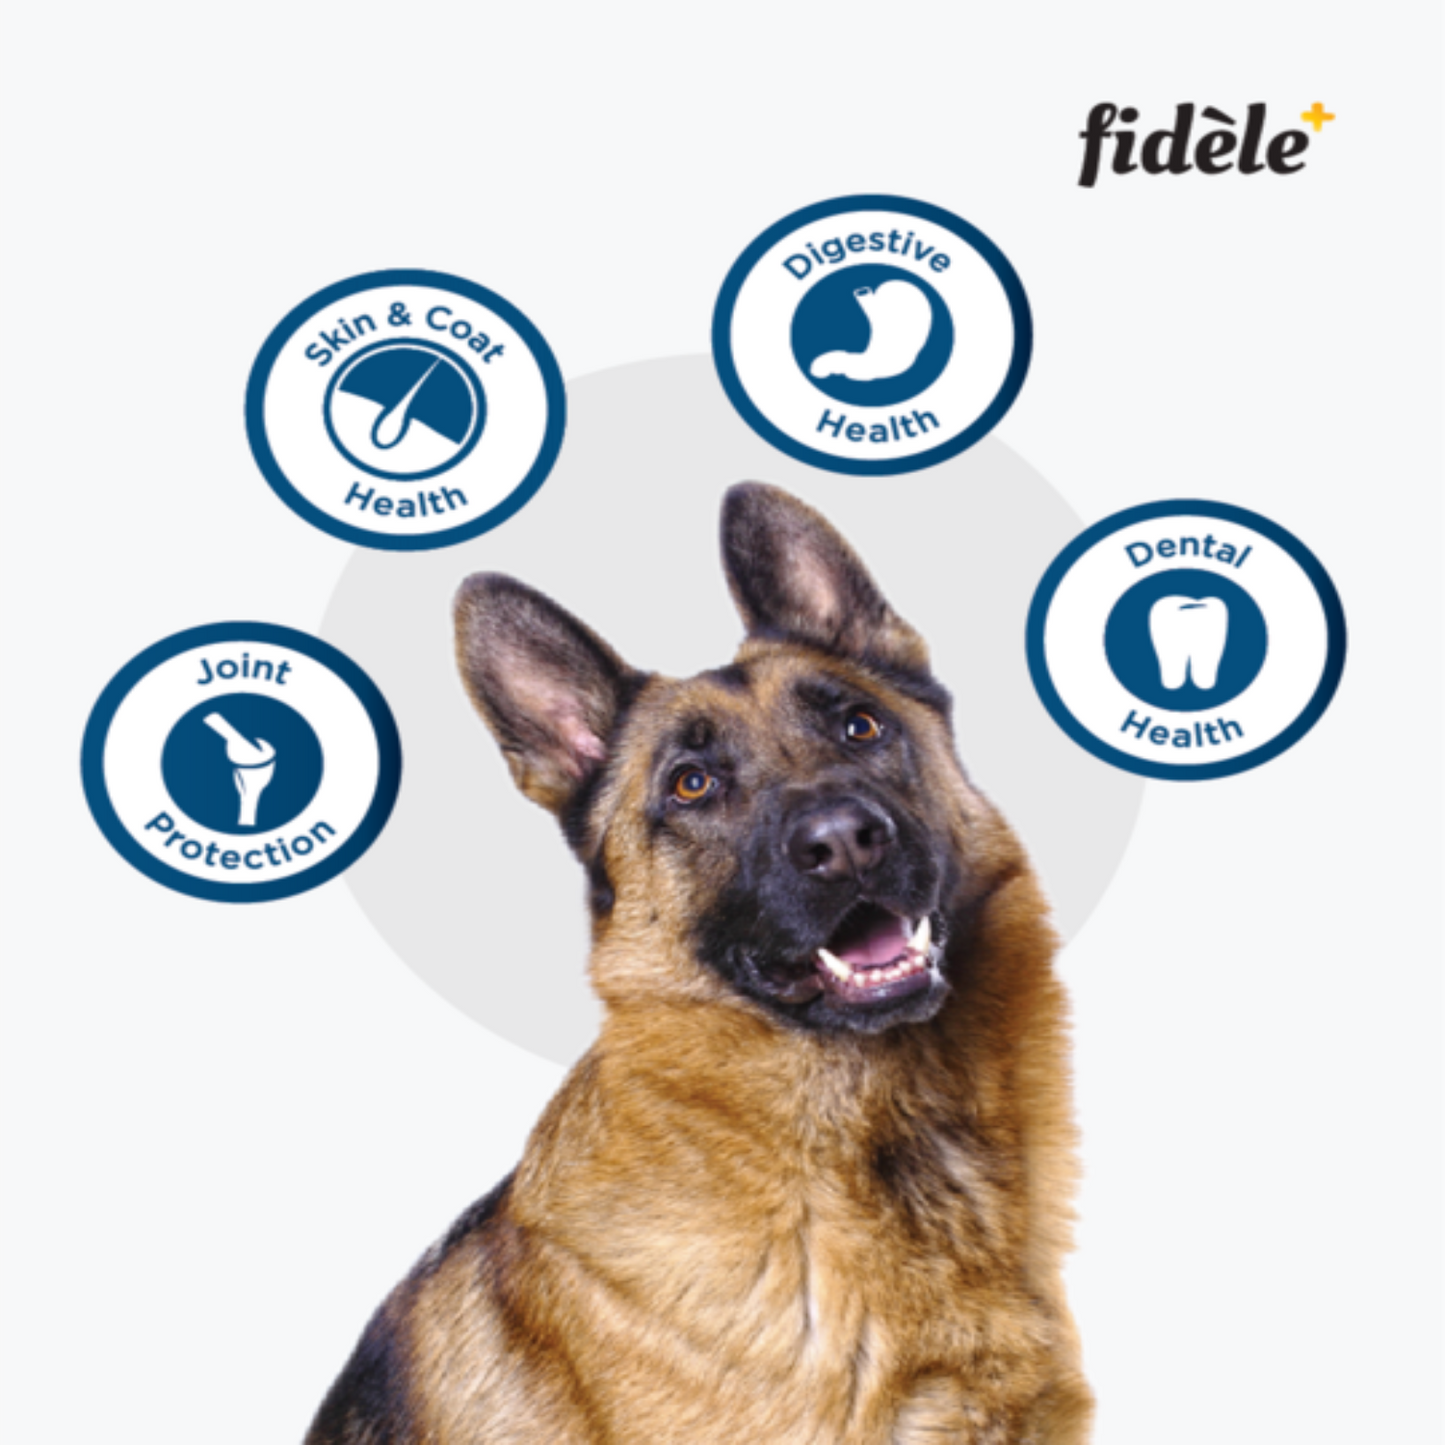 Fidele+ - Adult Large Dry Food For Dogs